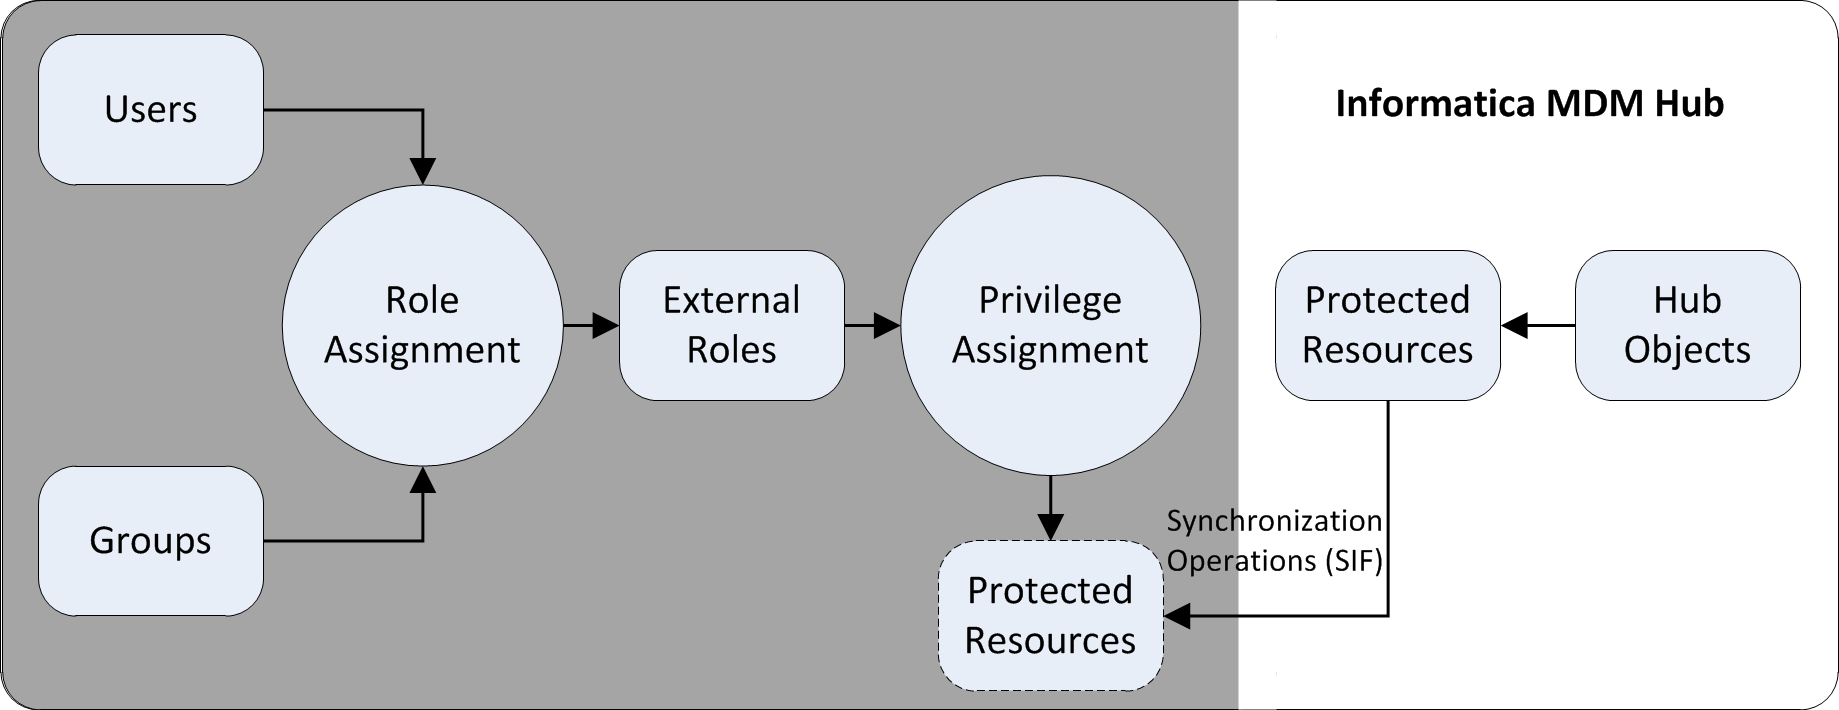 An illustration showing role and privilege assignment handled externally to the MDM Hub. External to the MDM Hub, users and groups can perform role assignment, which leads to the creation of external roles and privilege assignment. The MDM Hub handles the protected resources and Hub objects. The MDM Hub allows external users to access protected resources through SIF synchronization operations.
			 